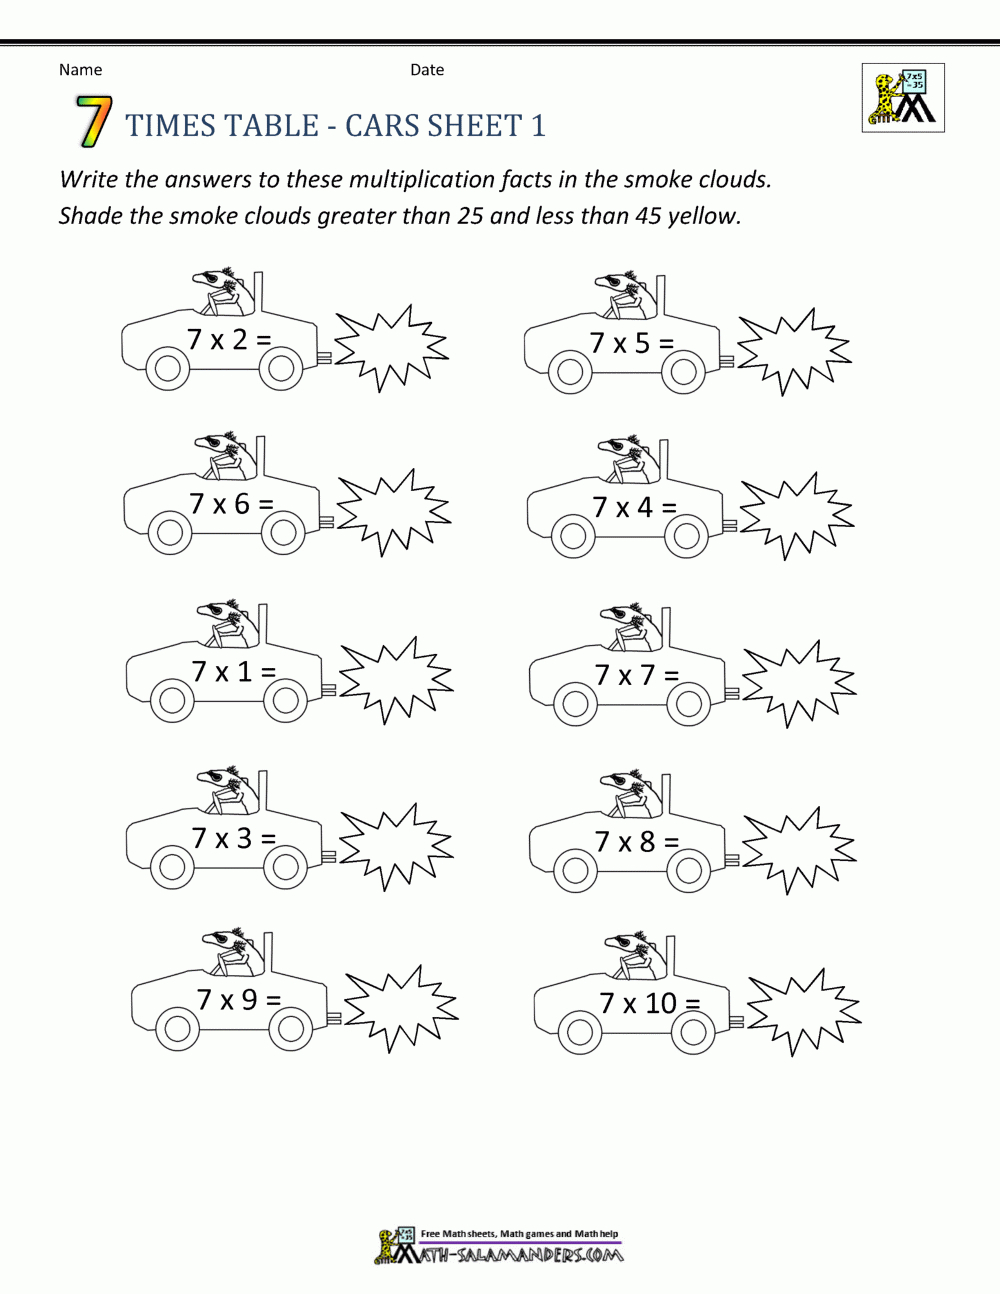 Free Times Table Worksheets - 7 Times Table within Multiplication Worksheets 6 And 7 Times Tables